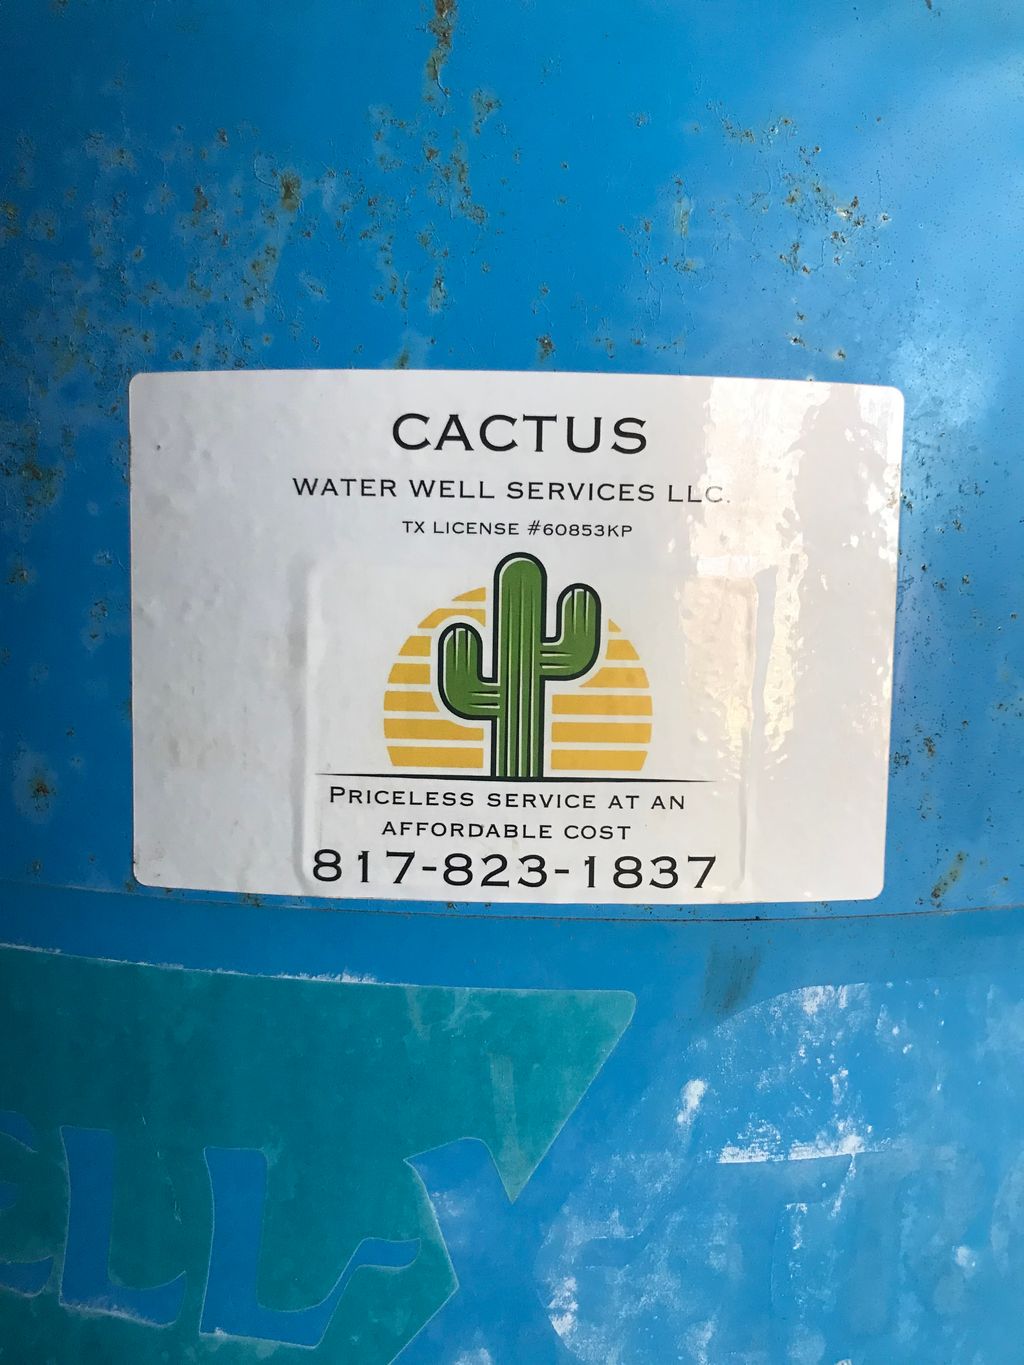 Cactus Water Well Services